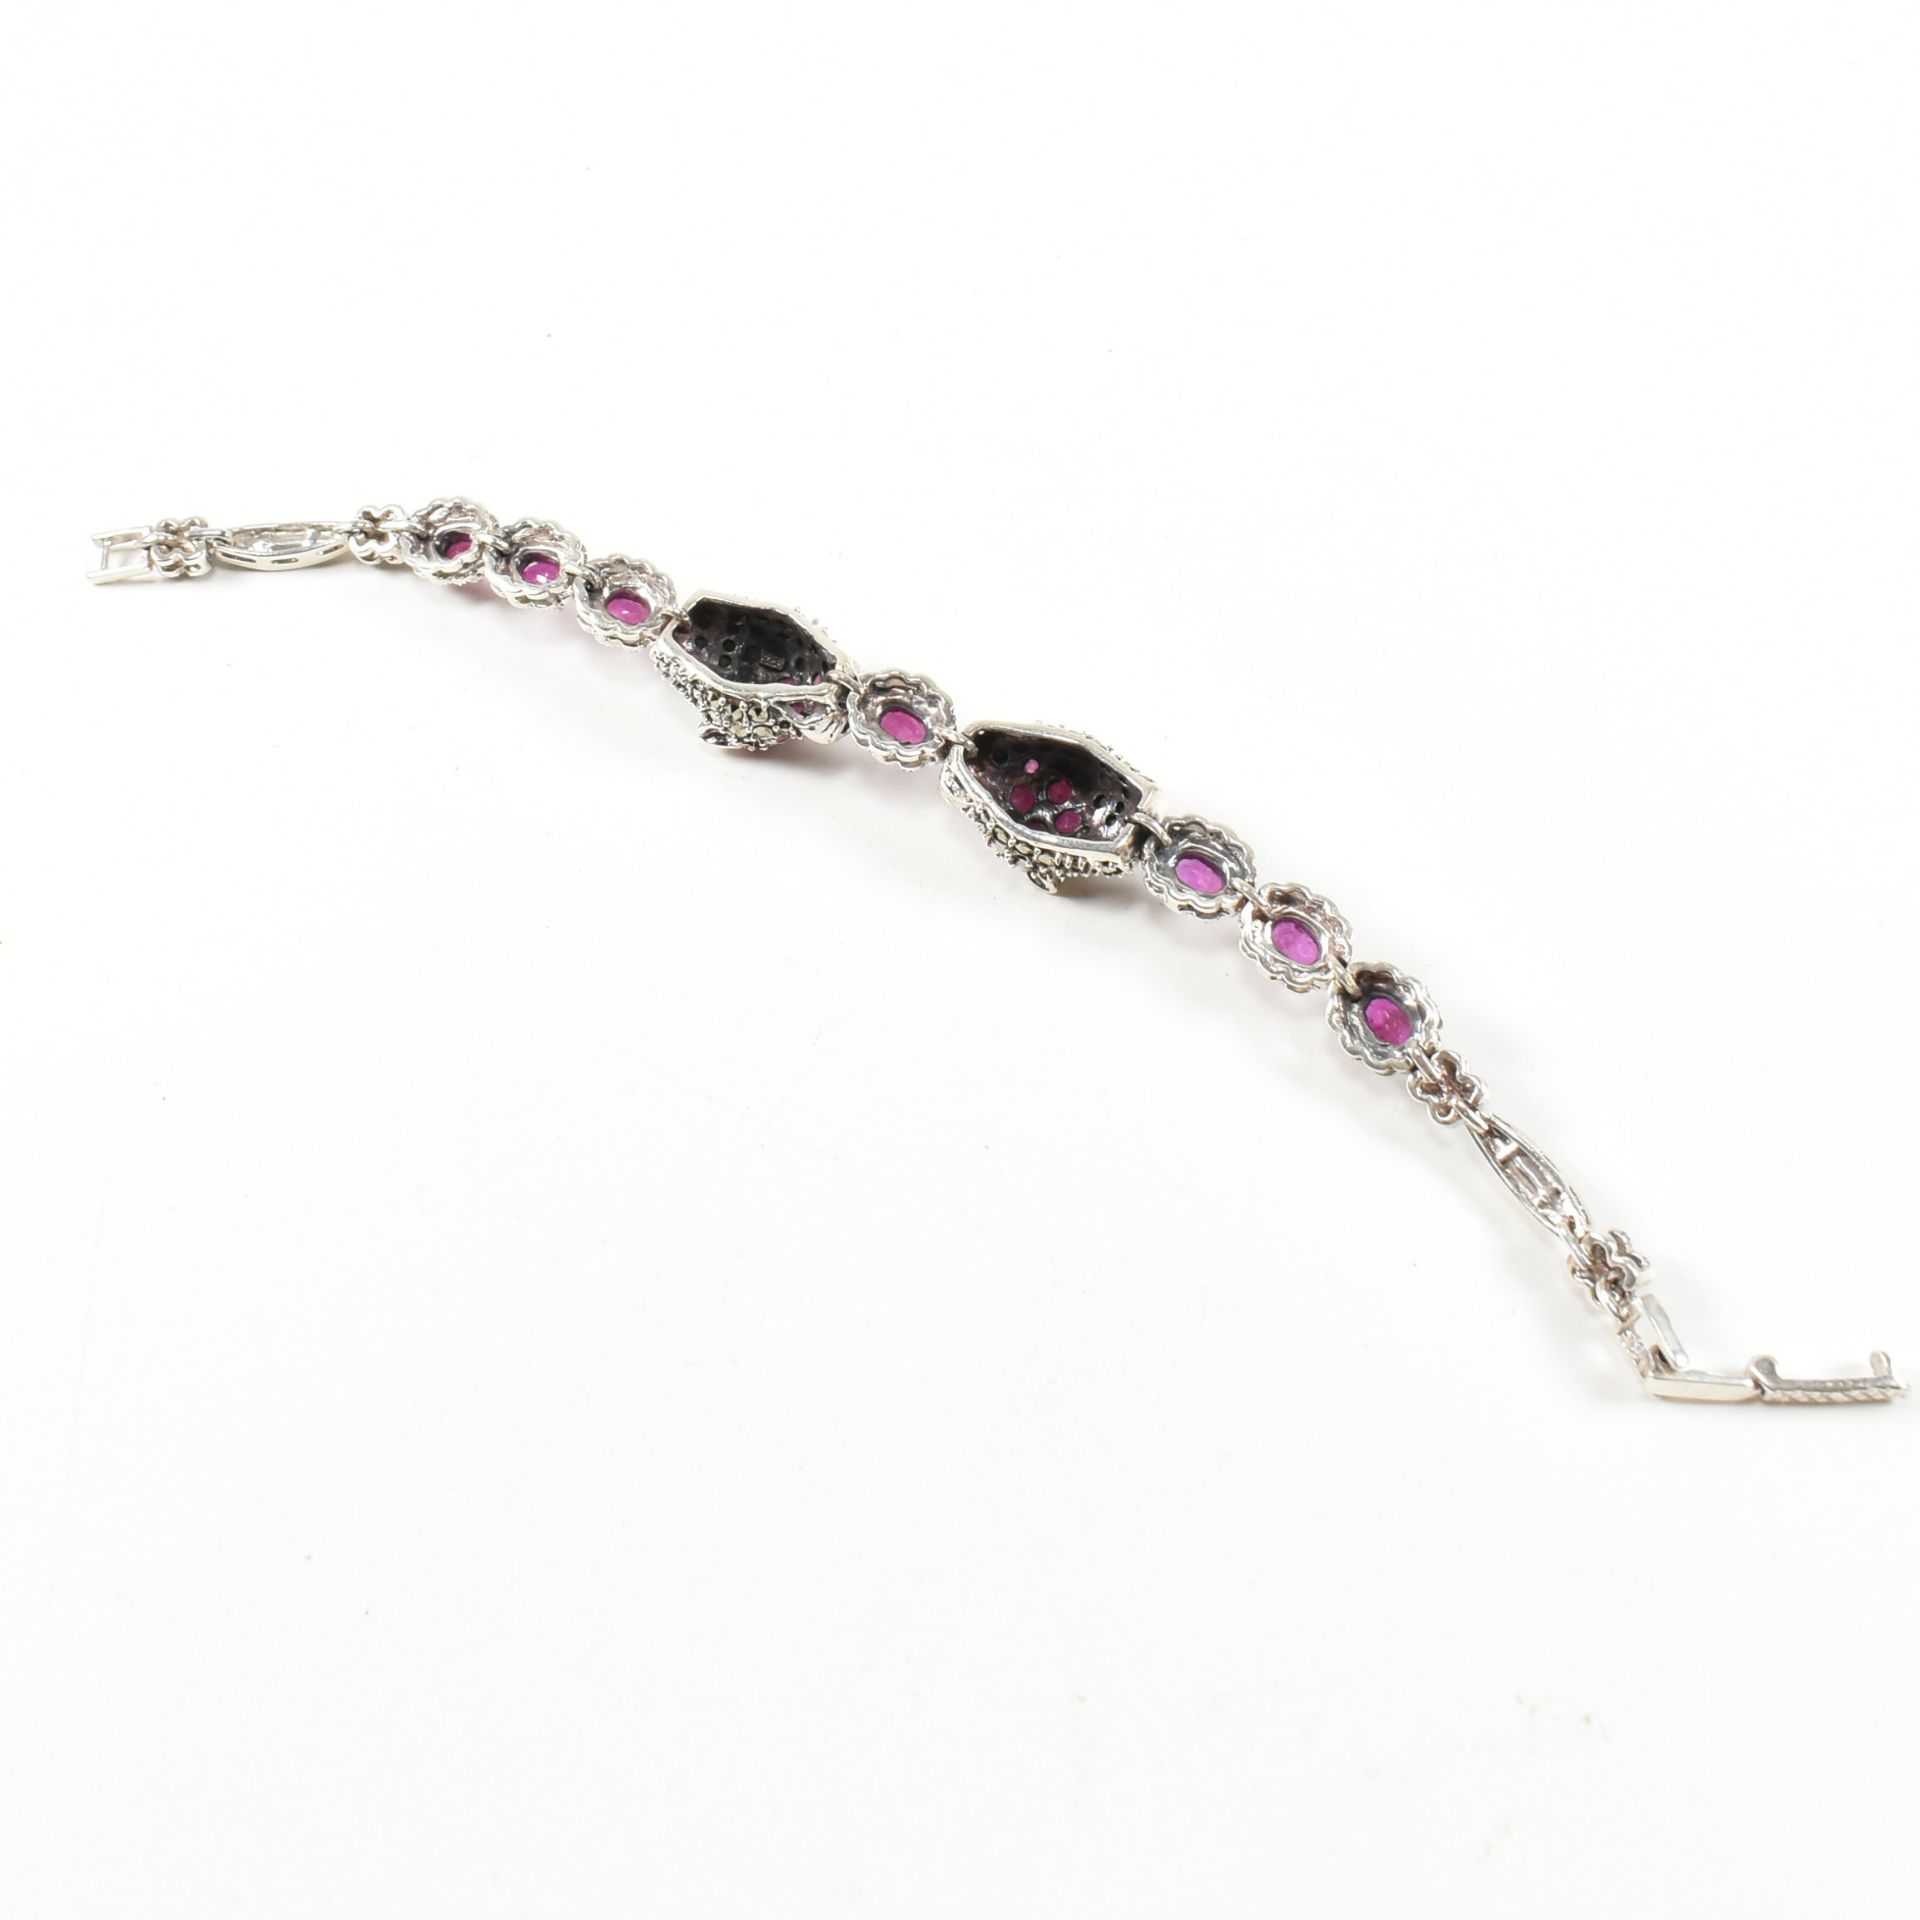 A 925 SILVER MARCASITE & RUBY SET DOUBLE PANTHER HEAD BRACELET - Image 5 of 6